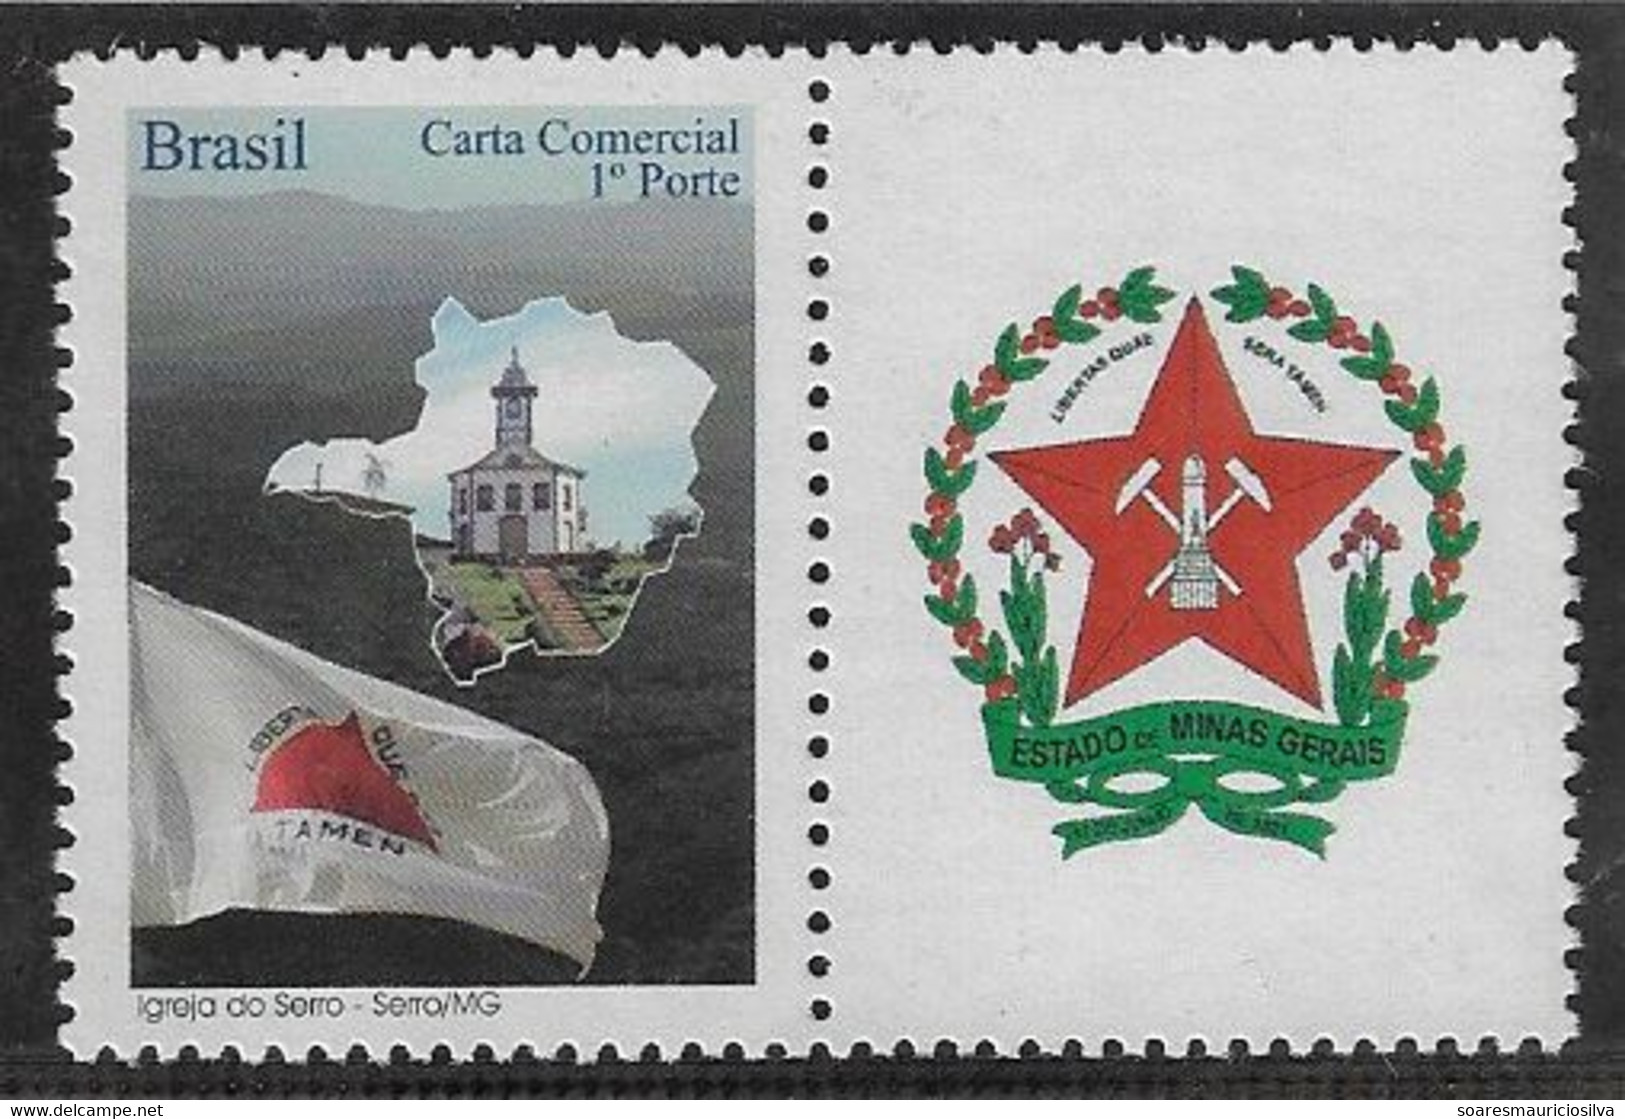 Brazil RHM-C-2856 Personalized Stamp Issued 2009 Church In Serro Map Flag Minas Gerais state Coat Of Arms Coffee Mining - Personalisiert